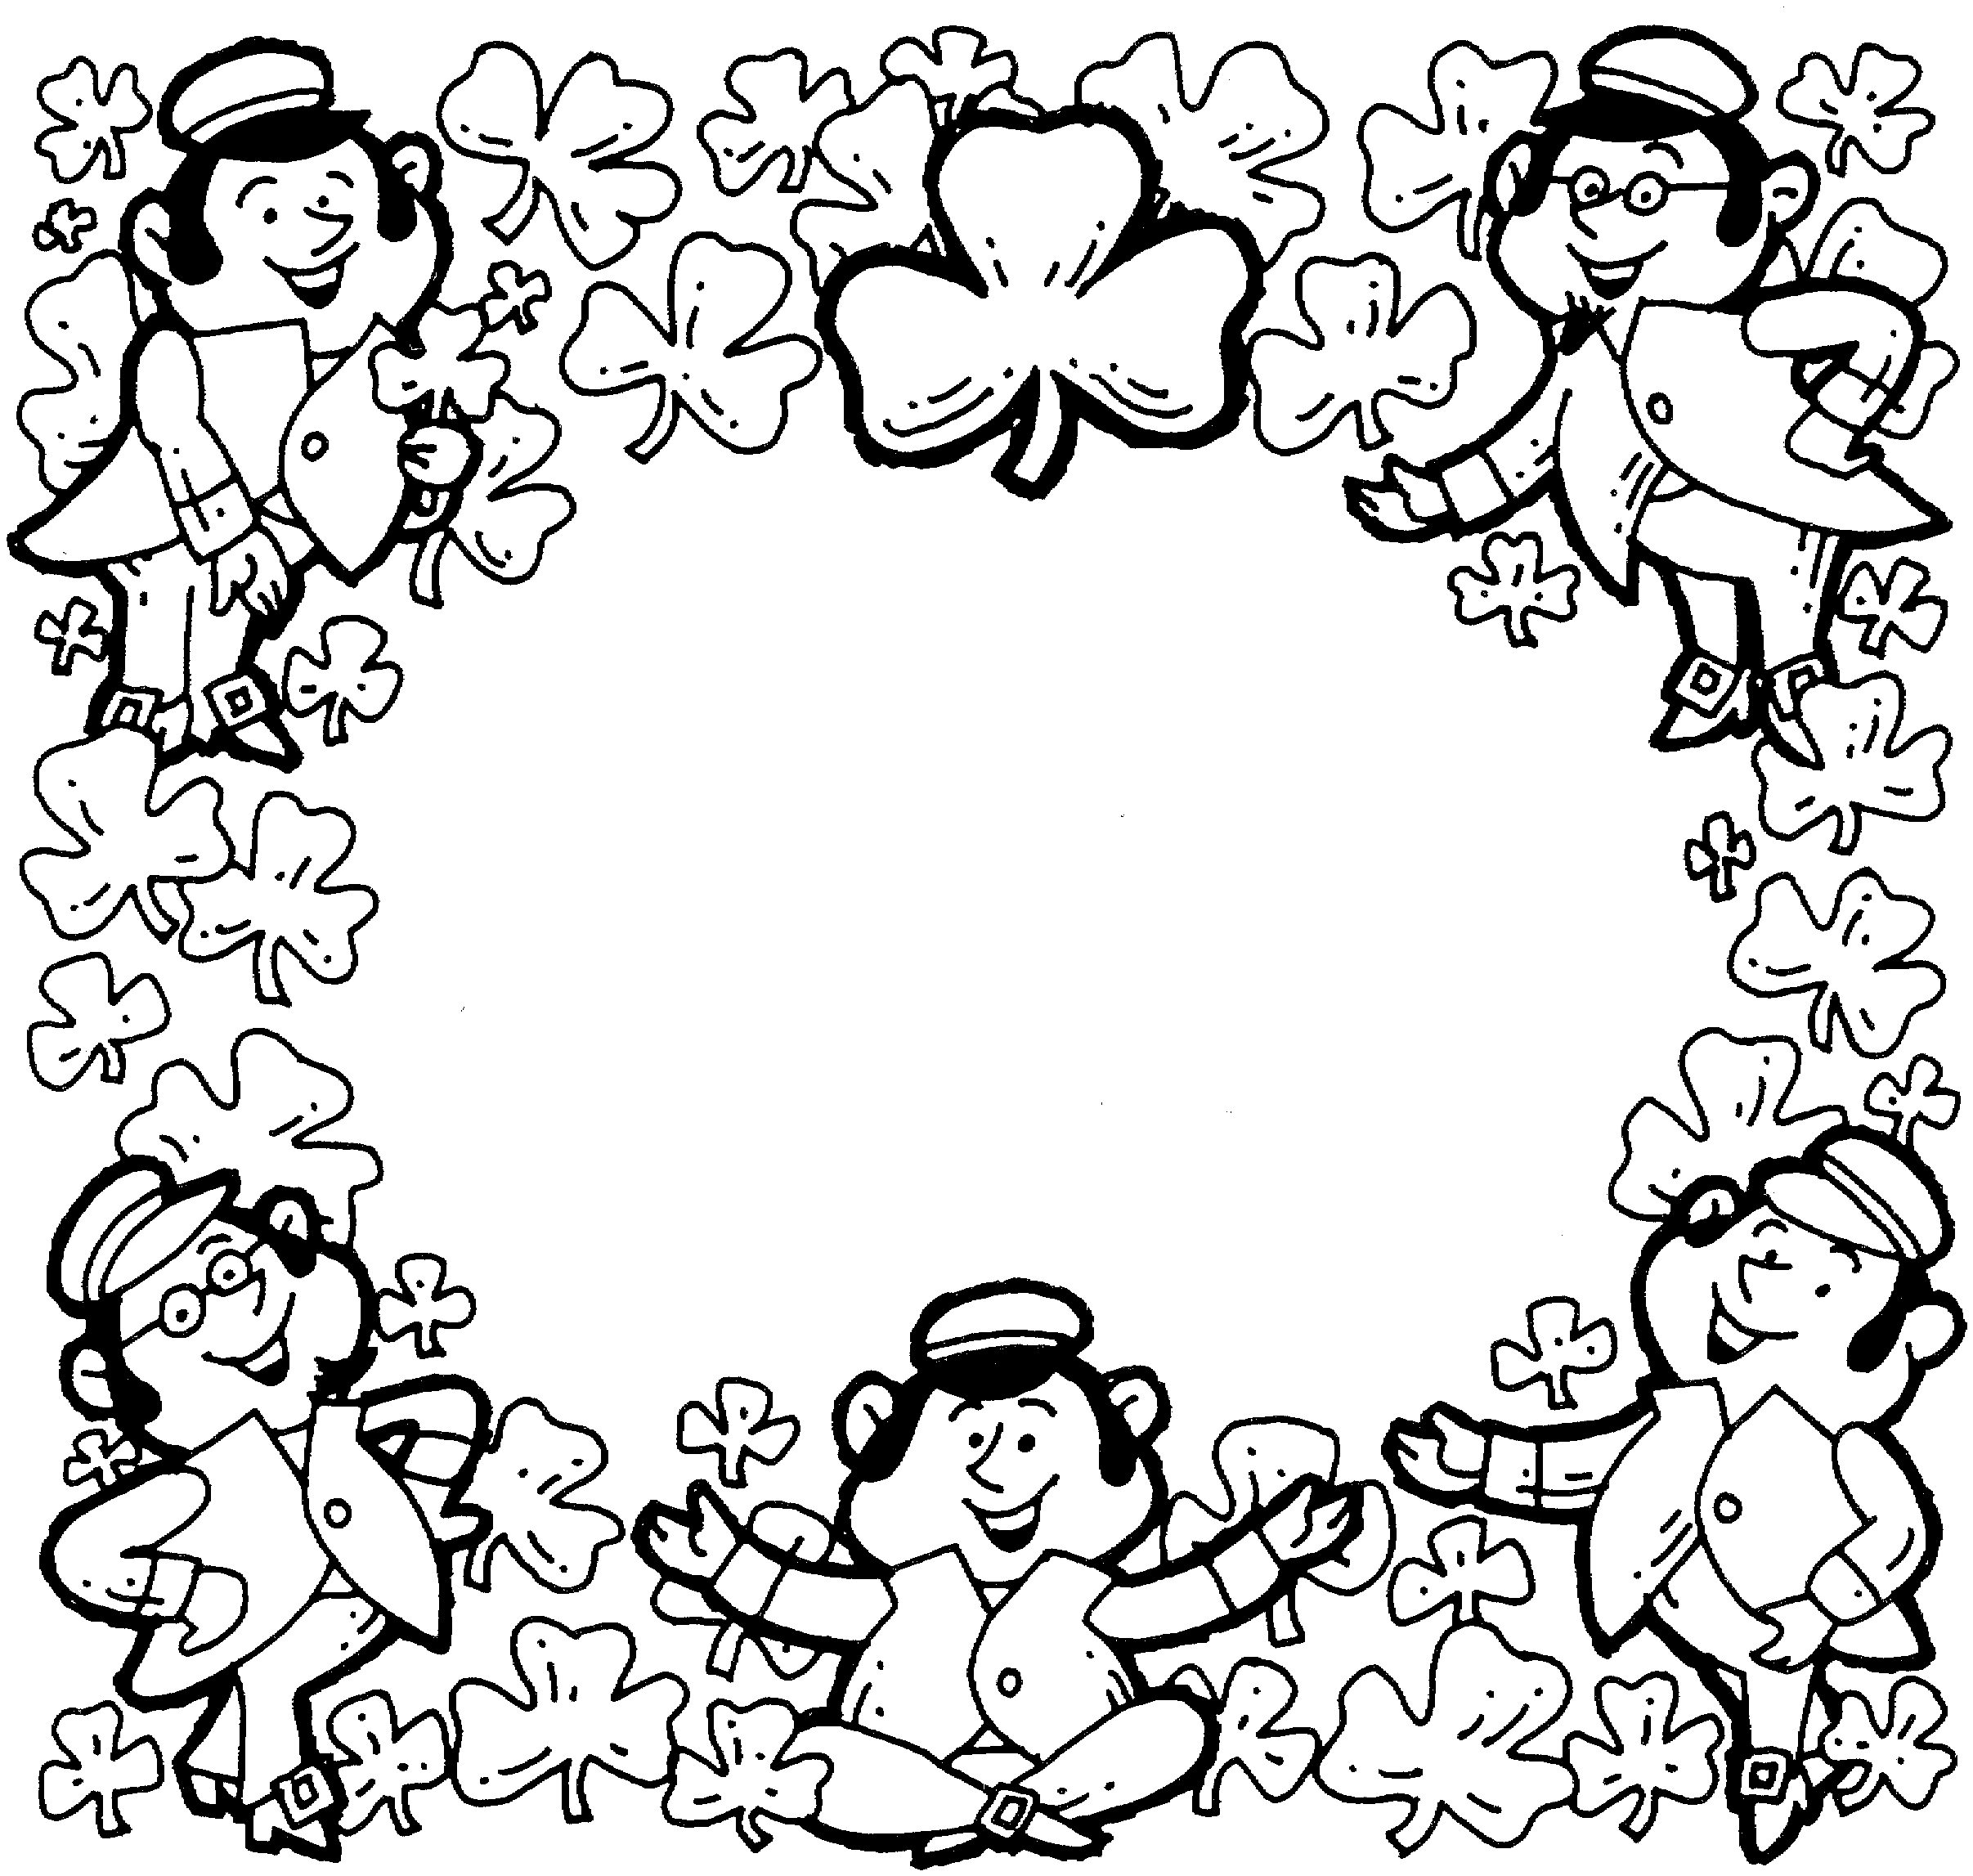 St. Patricks Day Coloring Pages - Dr. Odd